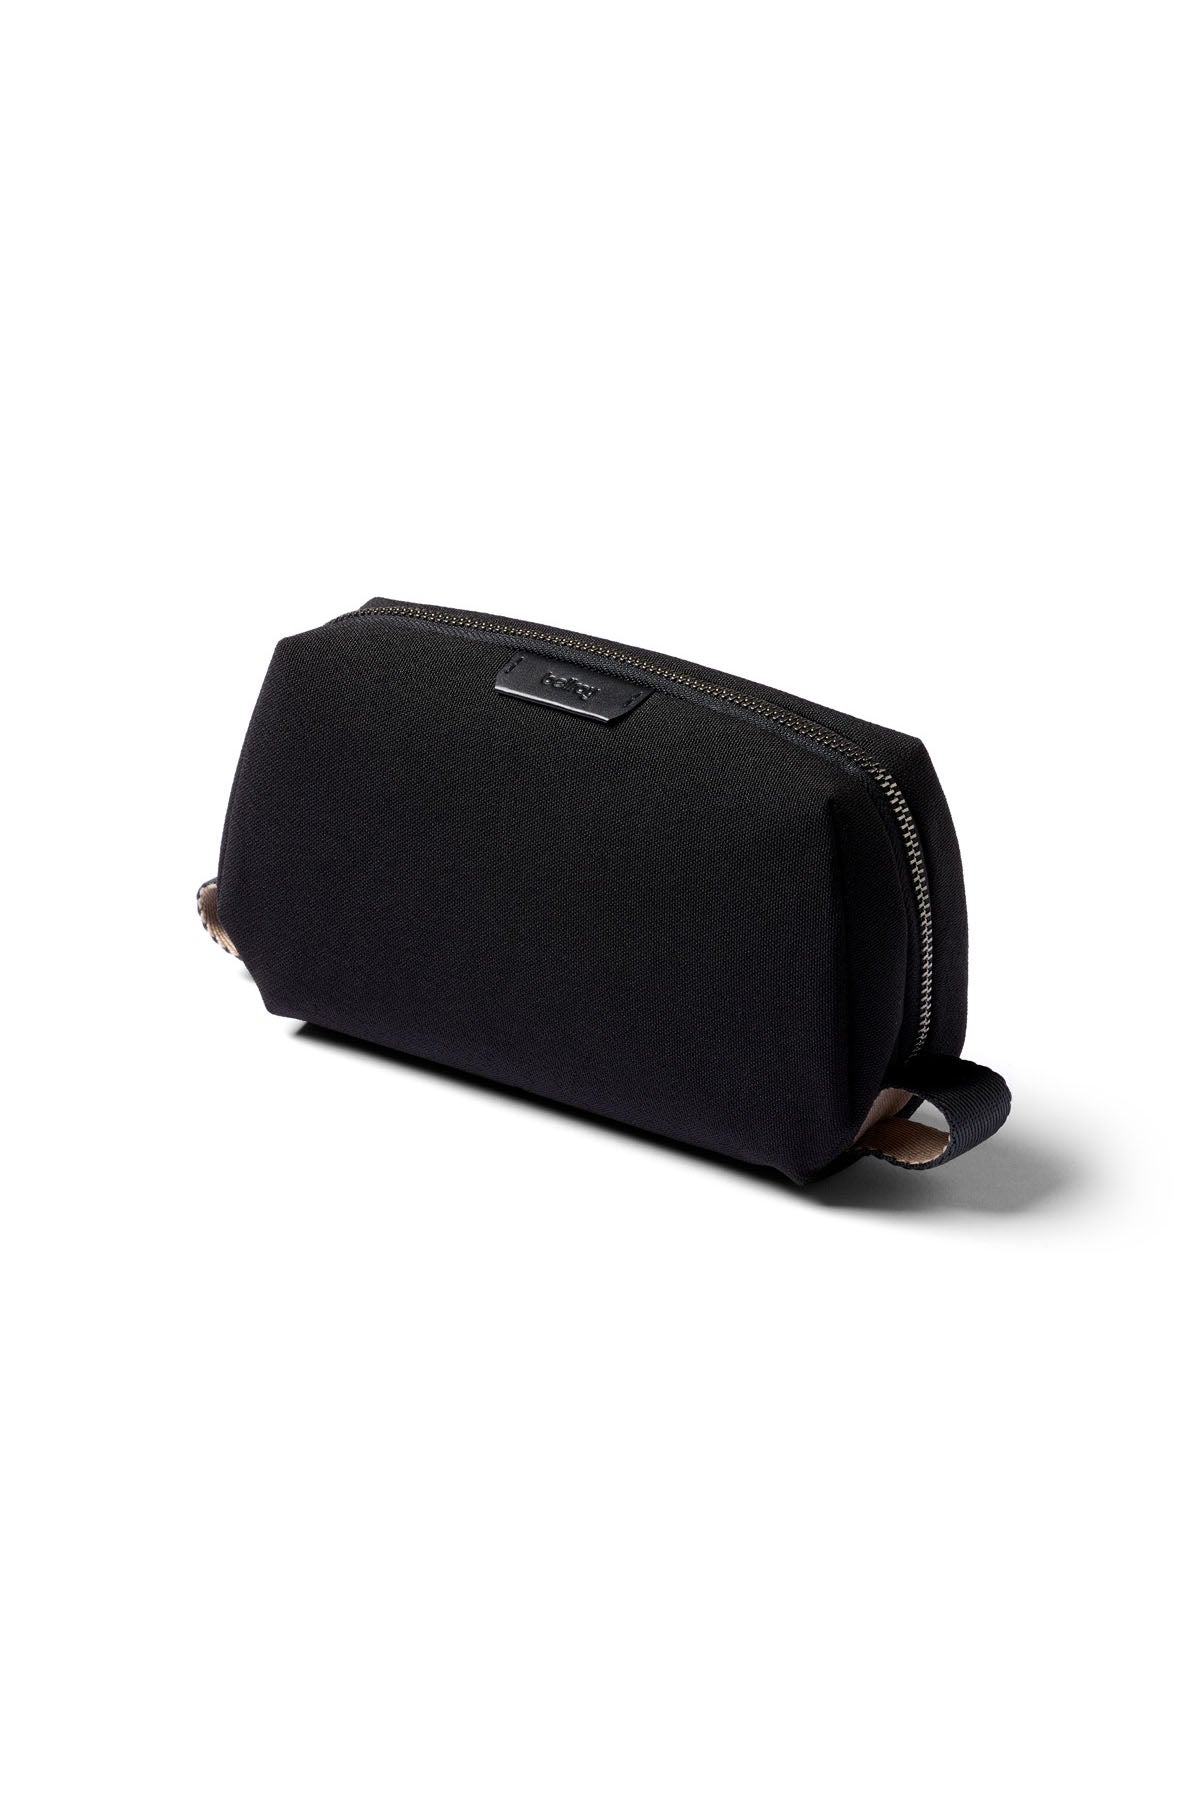 Bellroy - Toiletry Kit - Black - Front